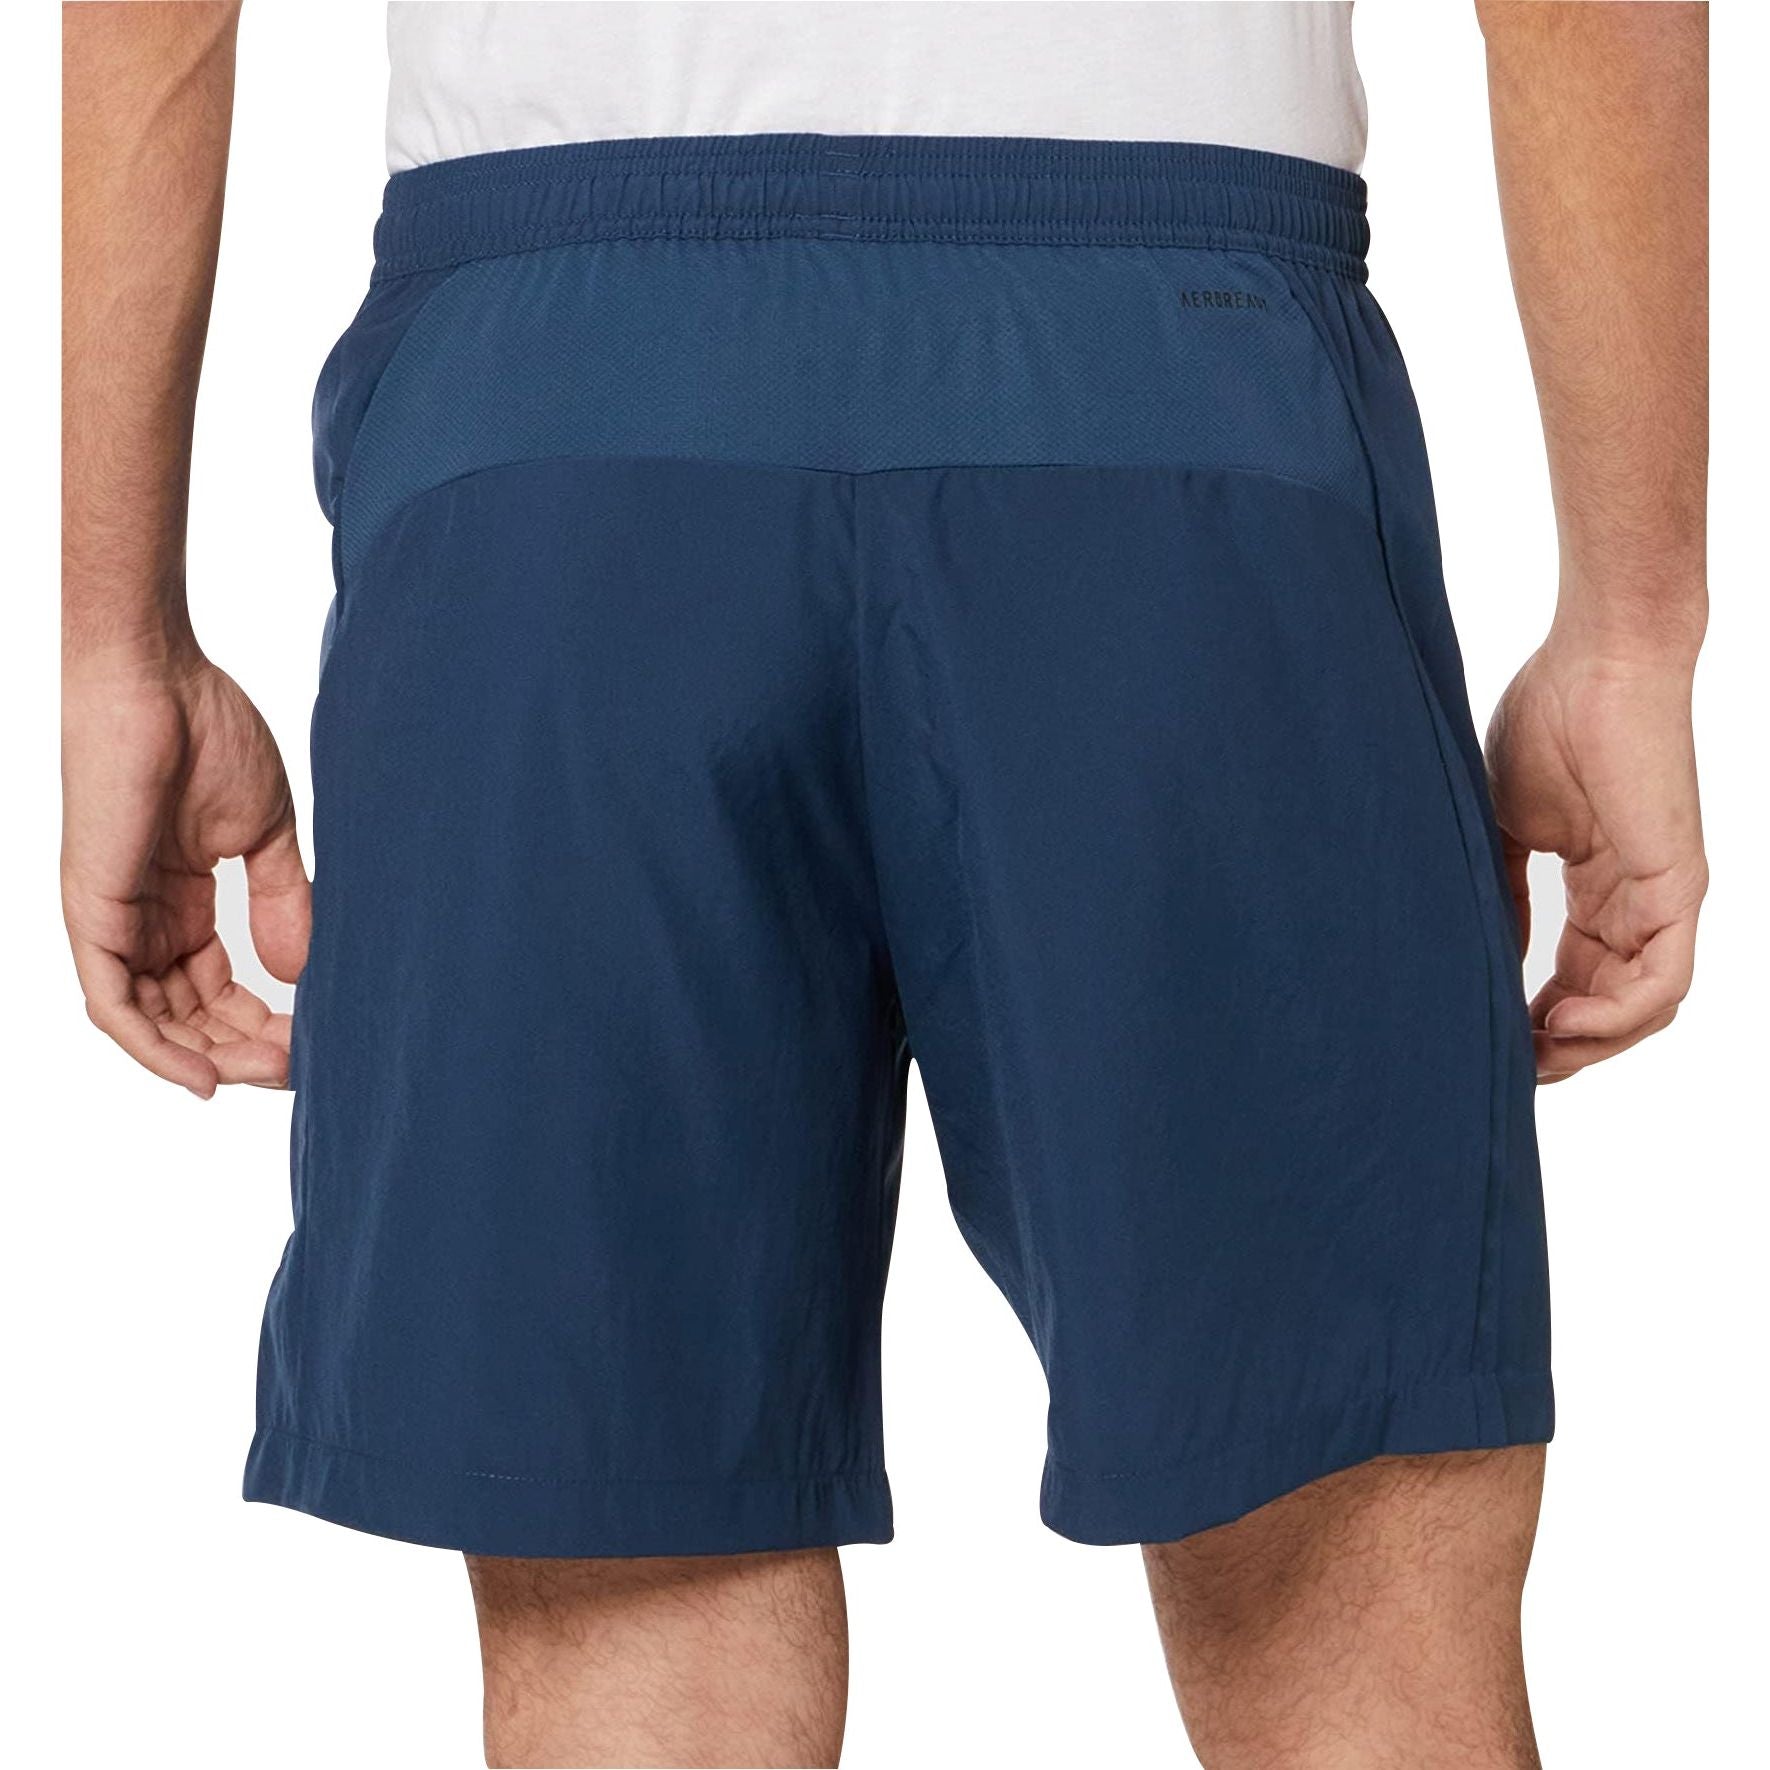 Adidas Aeroready Designed To Move Woven Shorts Gt8162 Back View